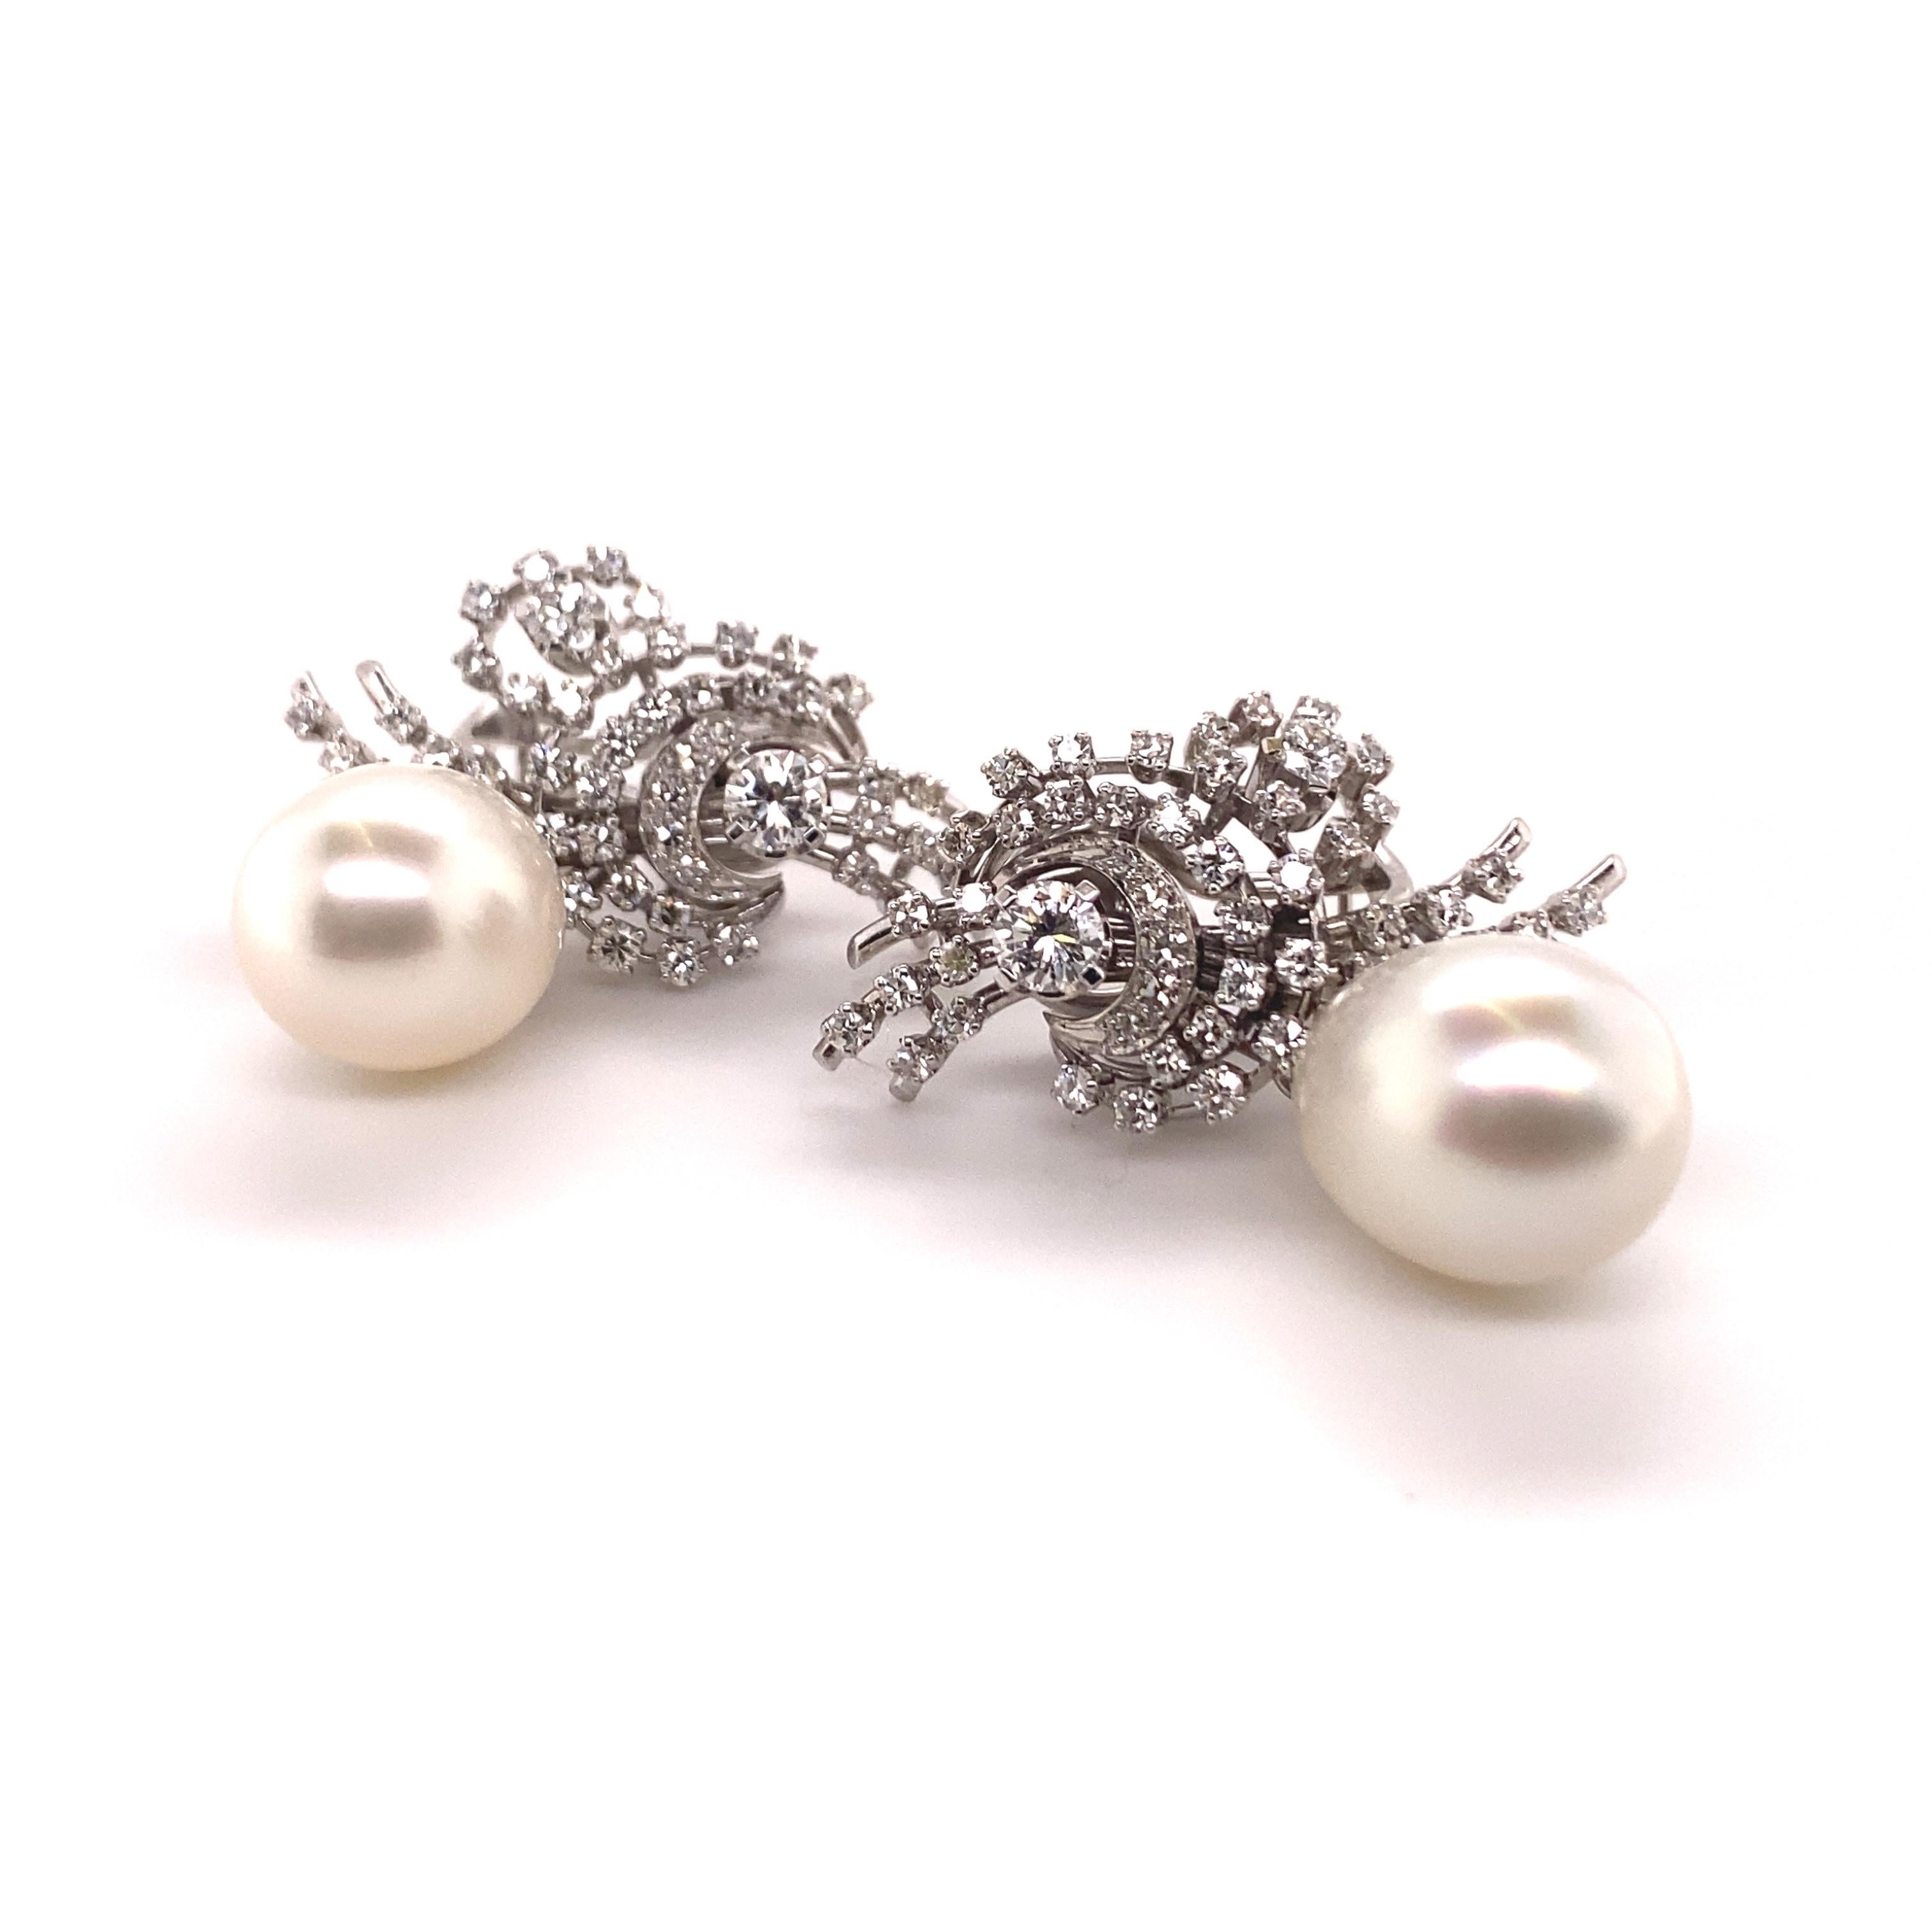 Brilliant Cut South Sea Cultured Pearl and Diamond Earclips by Bucherer in 18 Karat White Gold